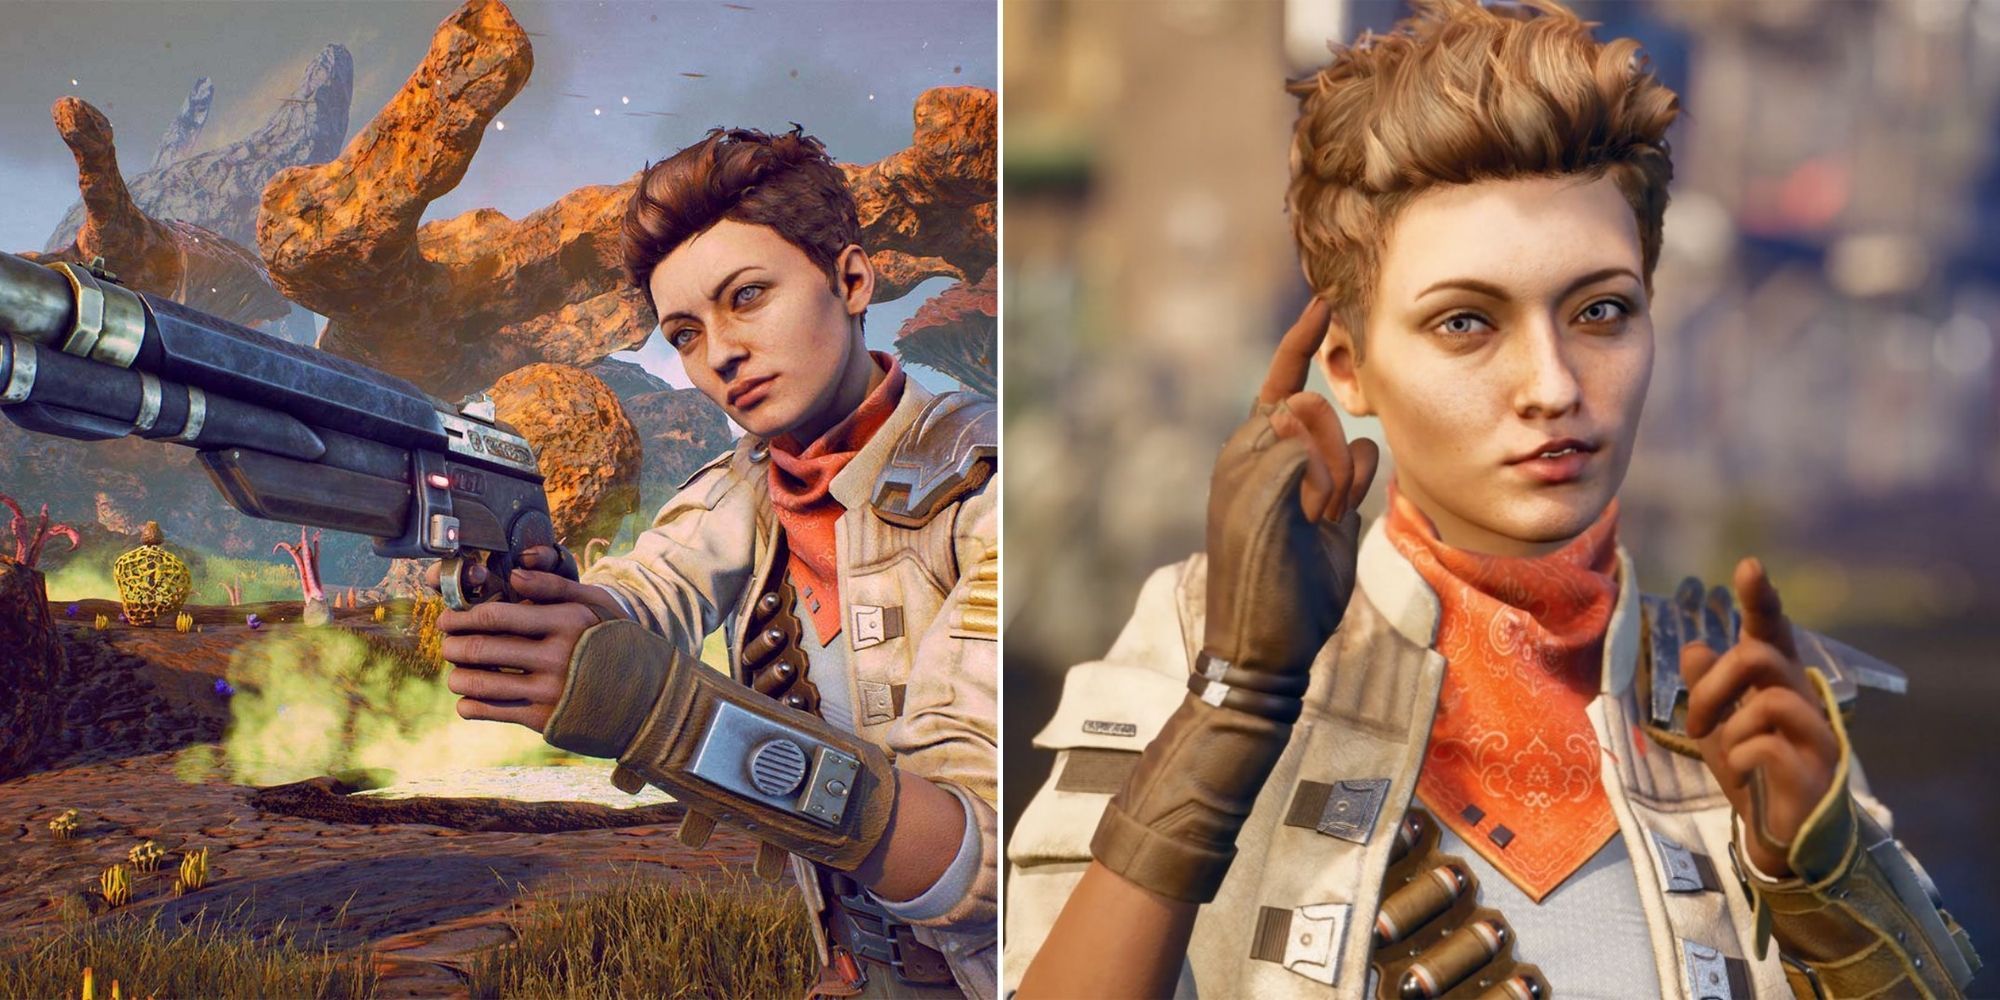 The Outer Worlds - Ellie shooting a pistol - Ellie close up